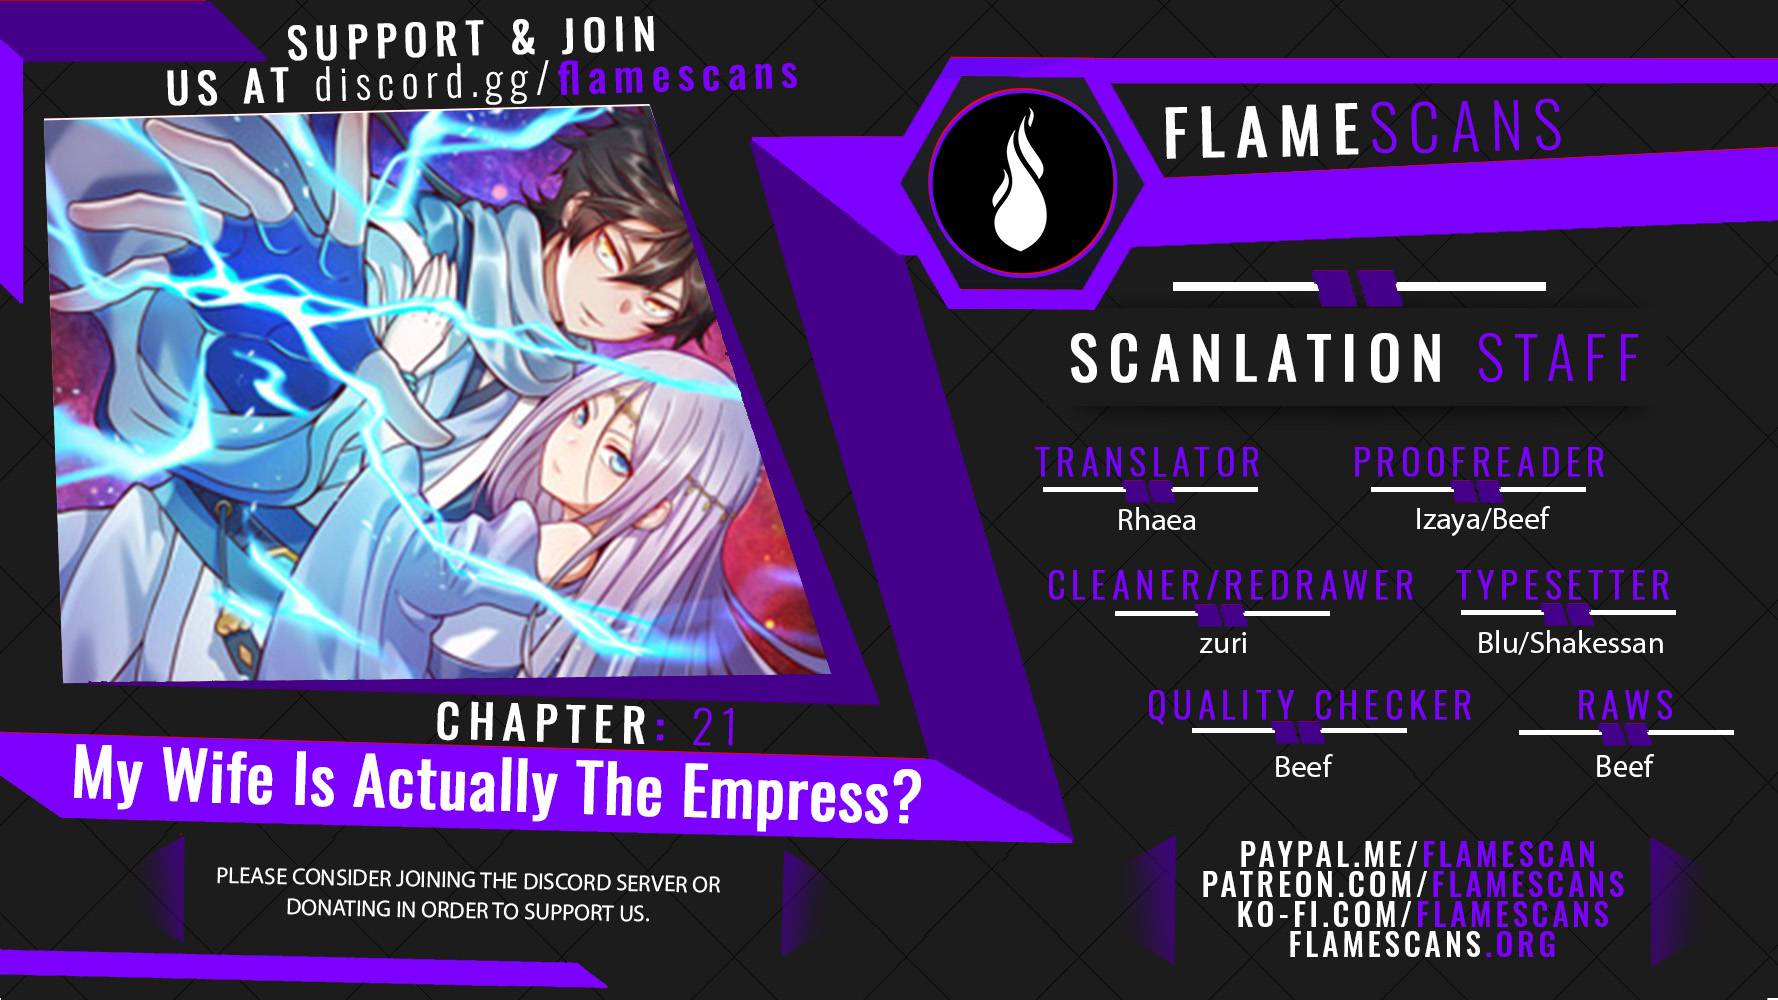 My Wife Is Actually The Empress? Chapter 21